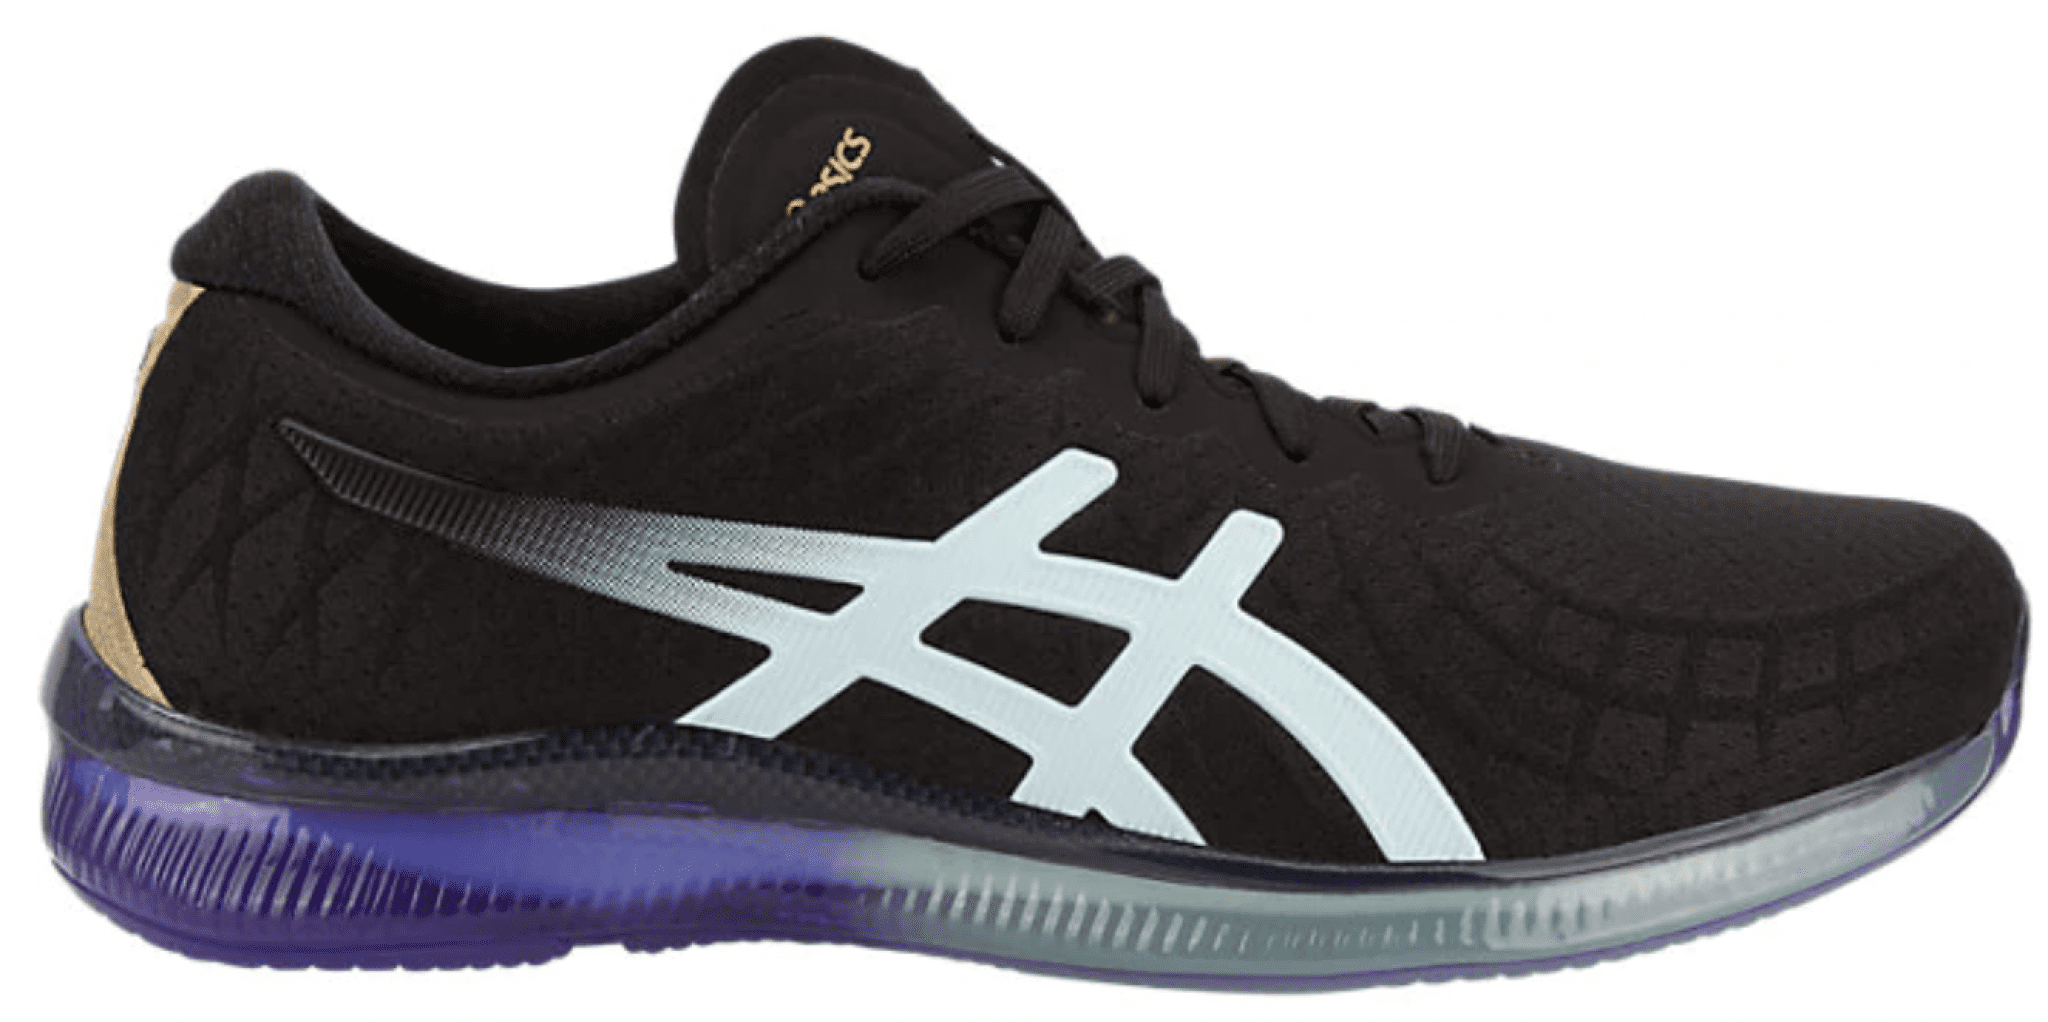 Asics Sneakers Over 85% OFF!